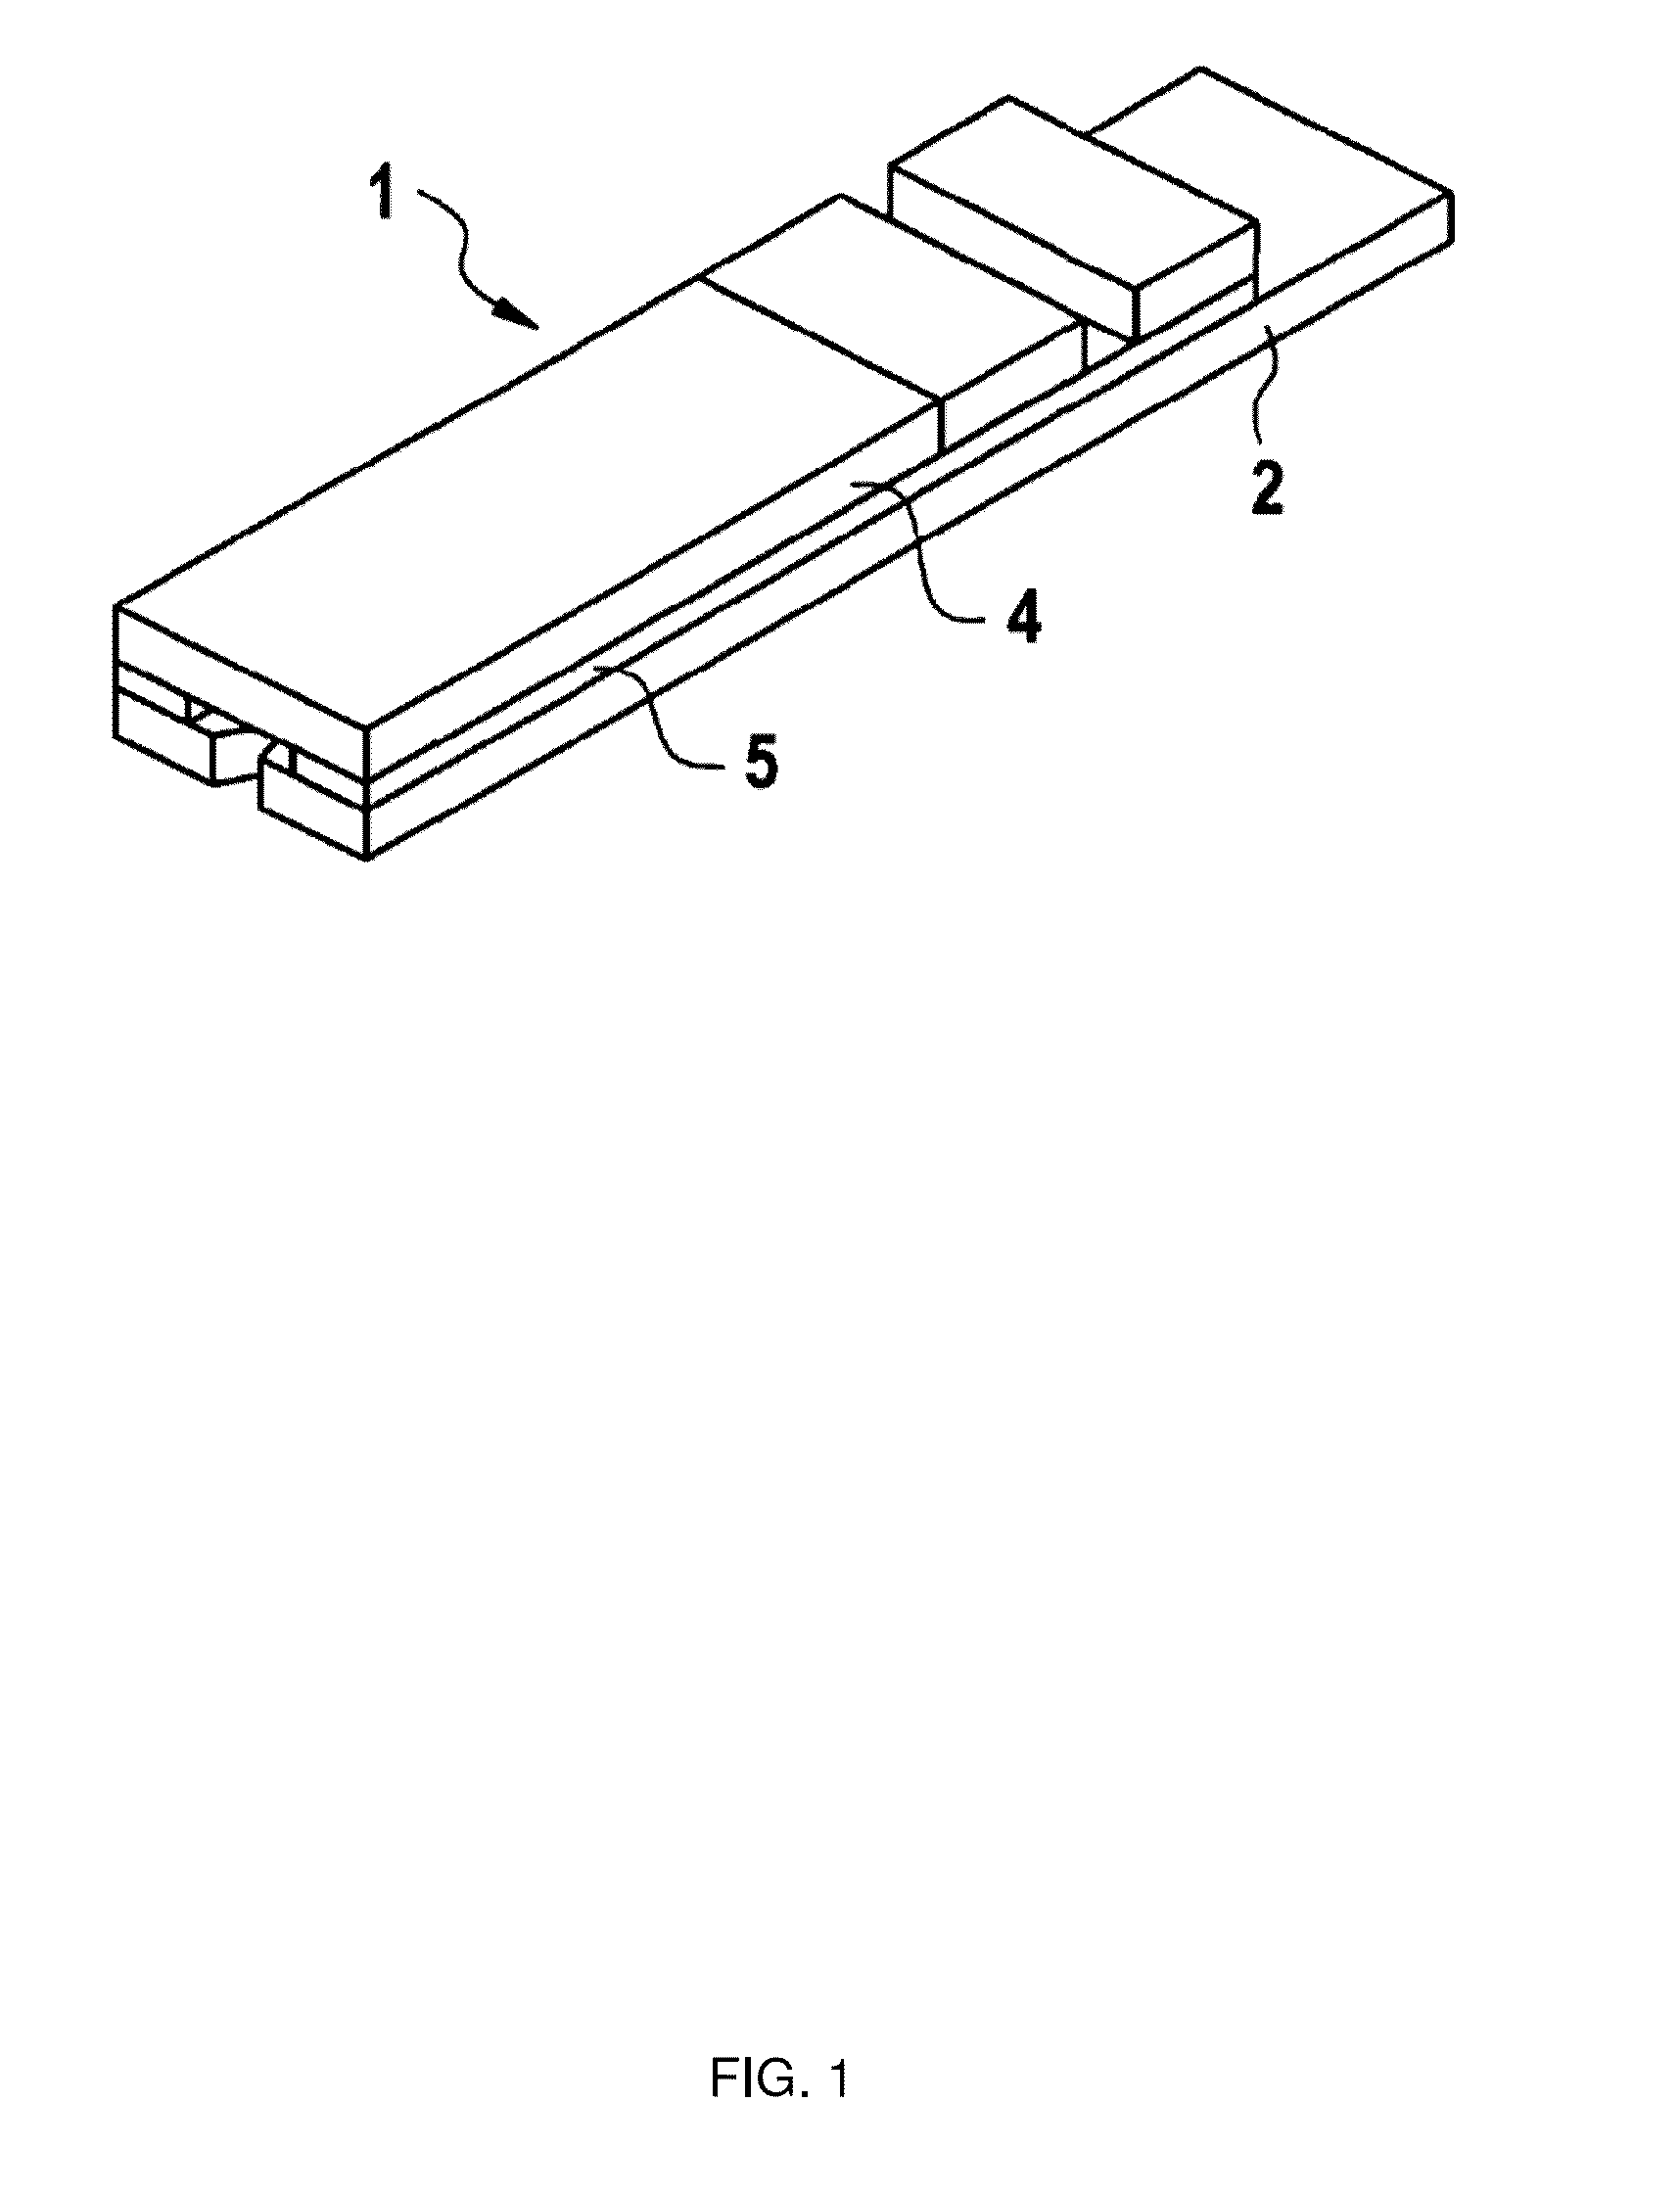 Test element having an optical data storage, device for reading the optical data storage of the test element and measuring system thereof